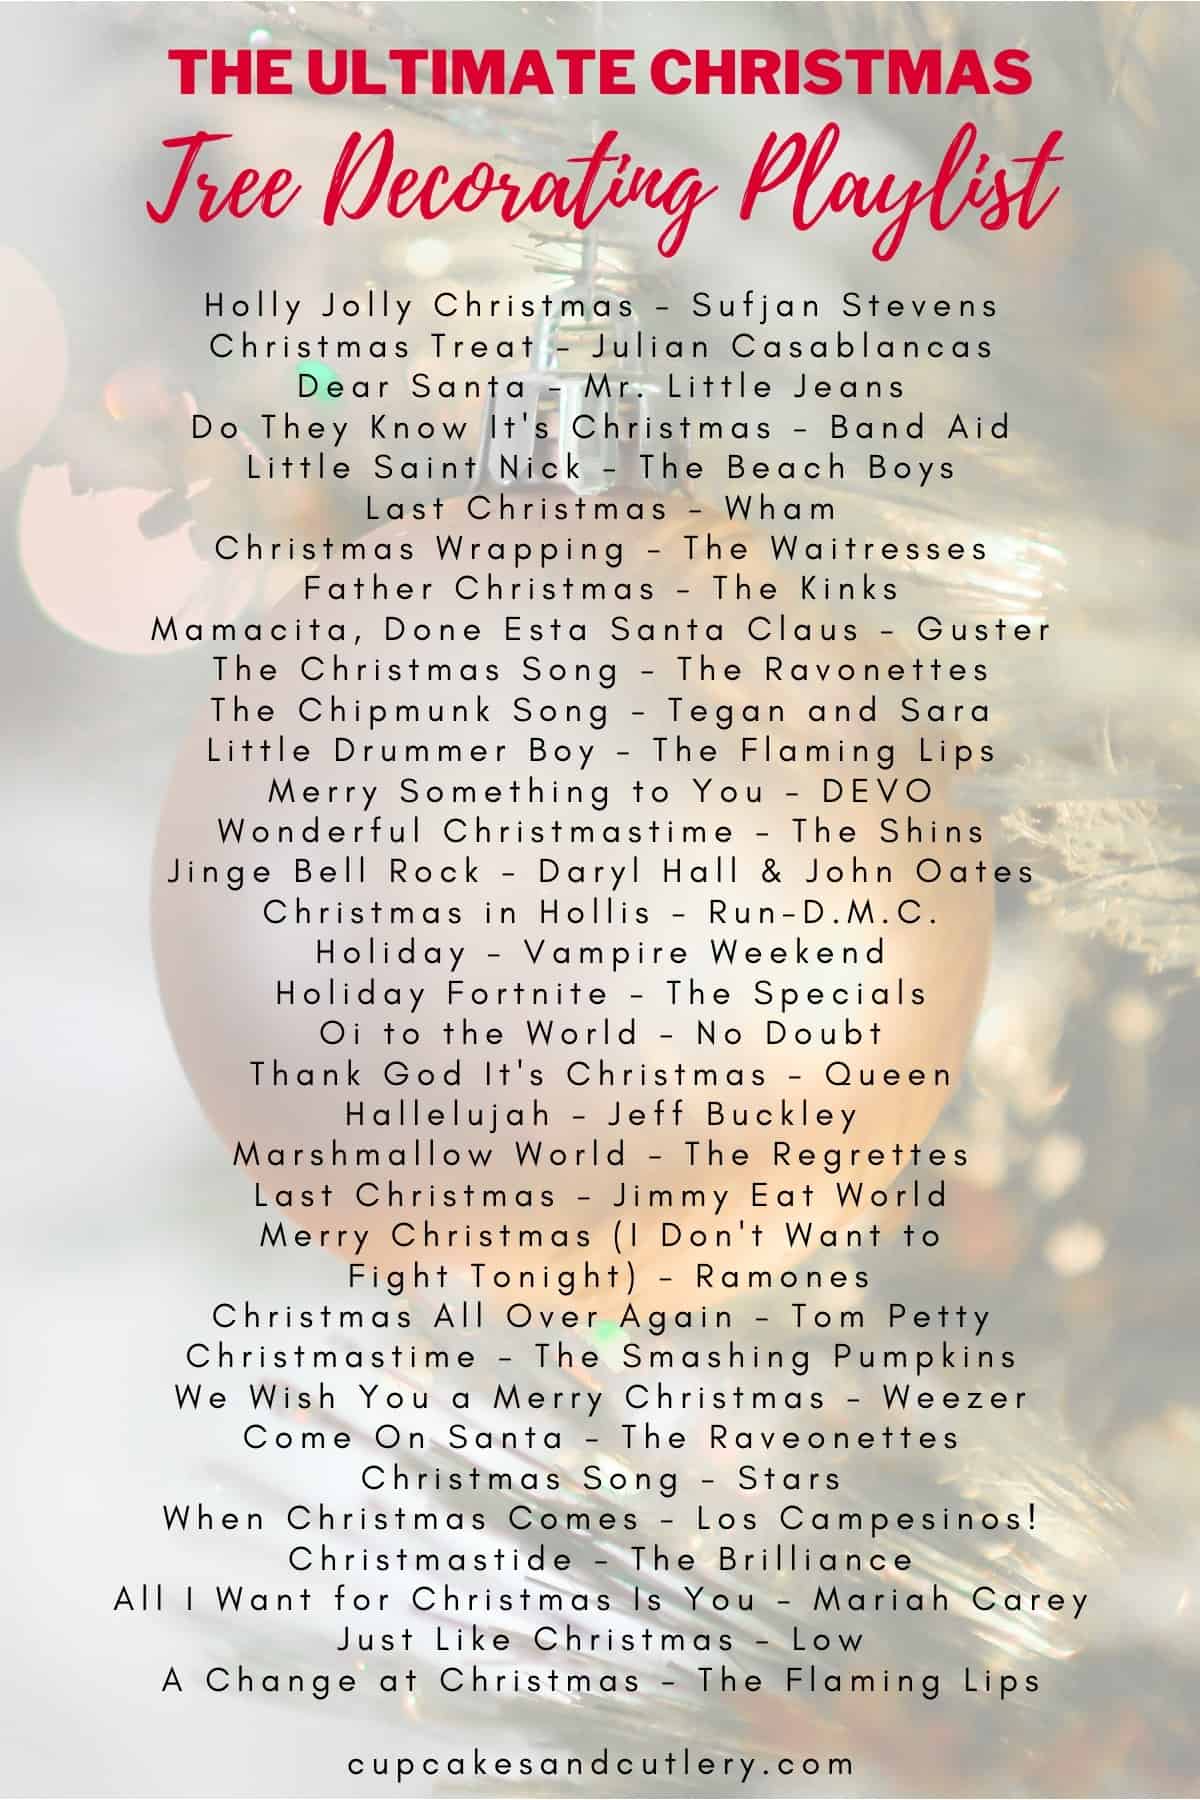 written list of indie holiday songs over a blurry picture of an ornament.